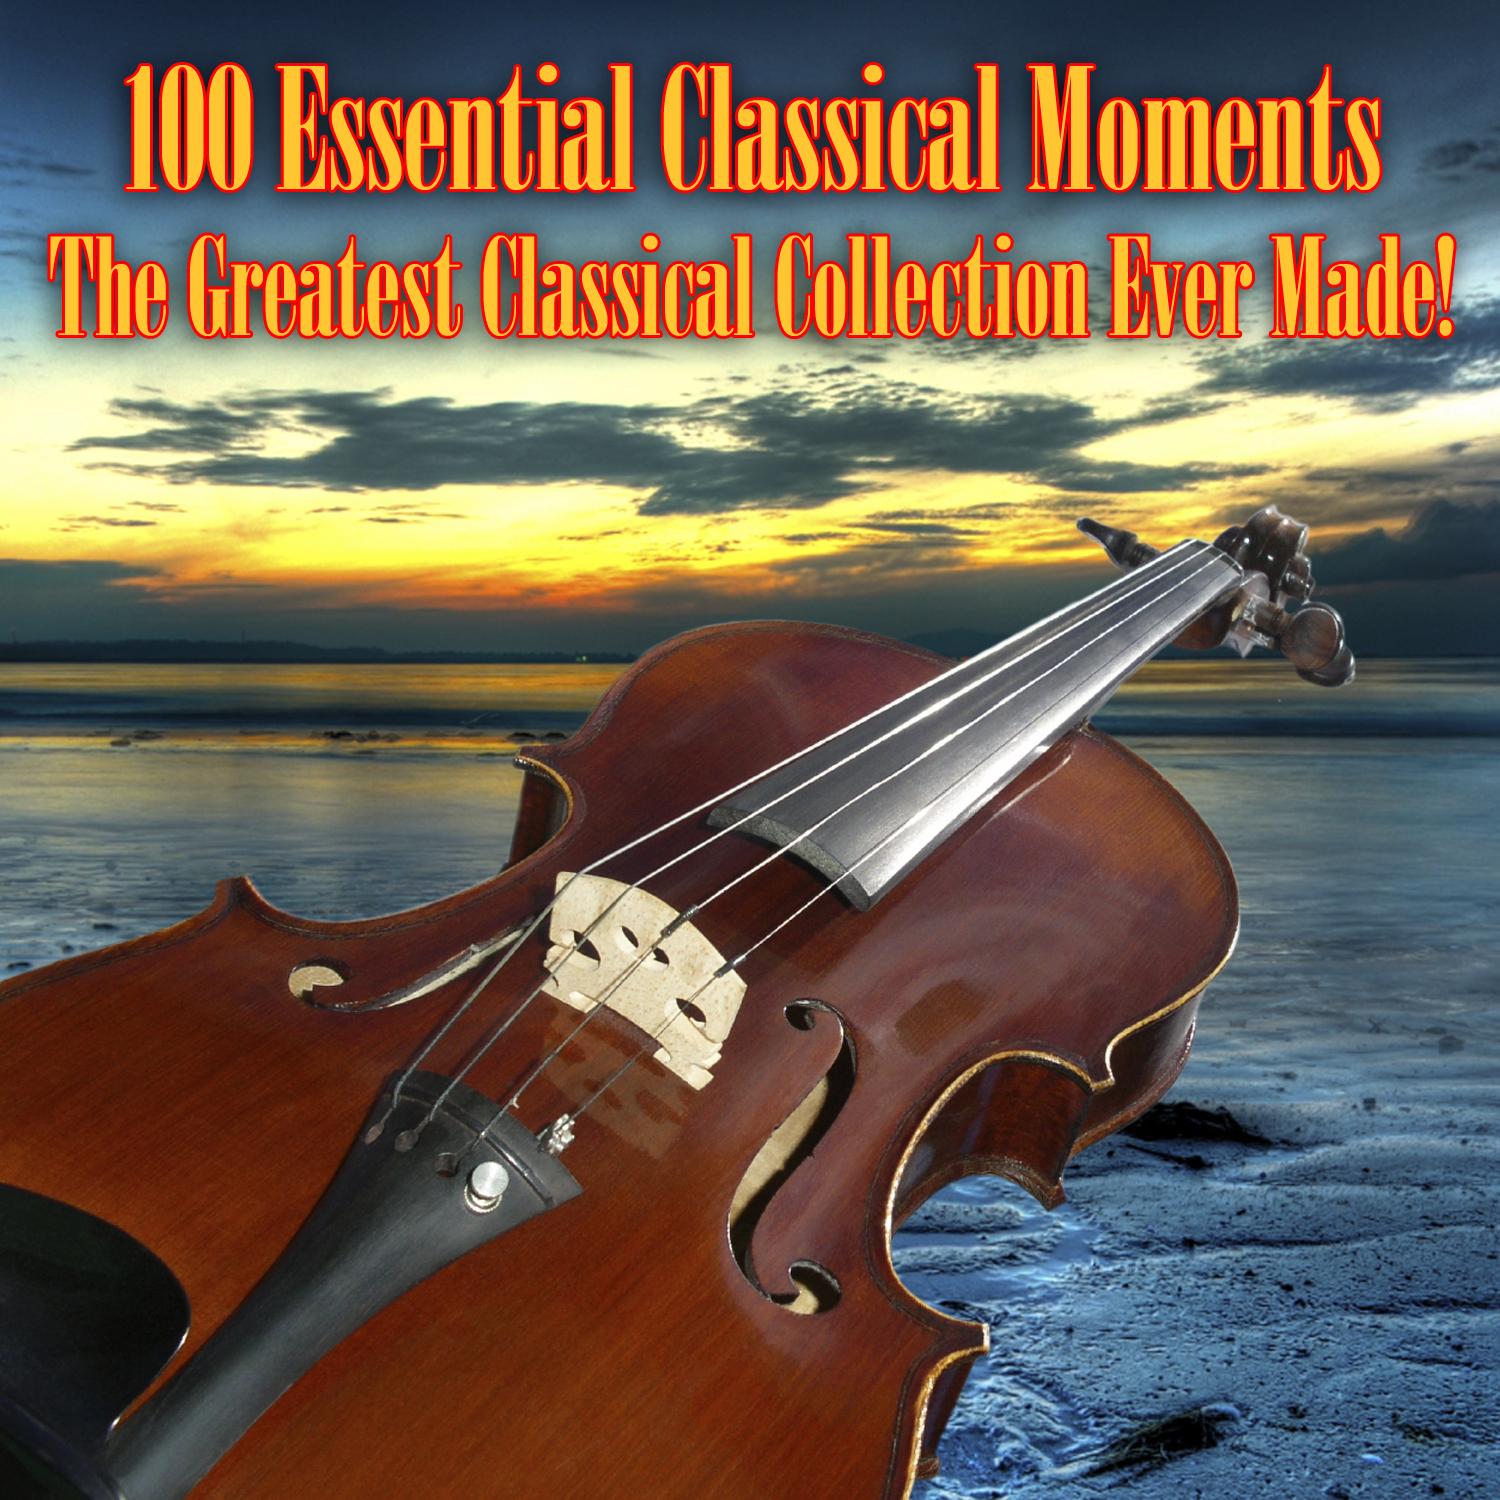 100 Essential Classical Moments - The Greatest Classical Collection Ever Made!